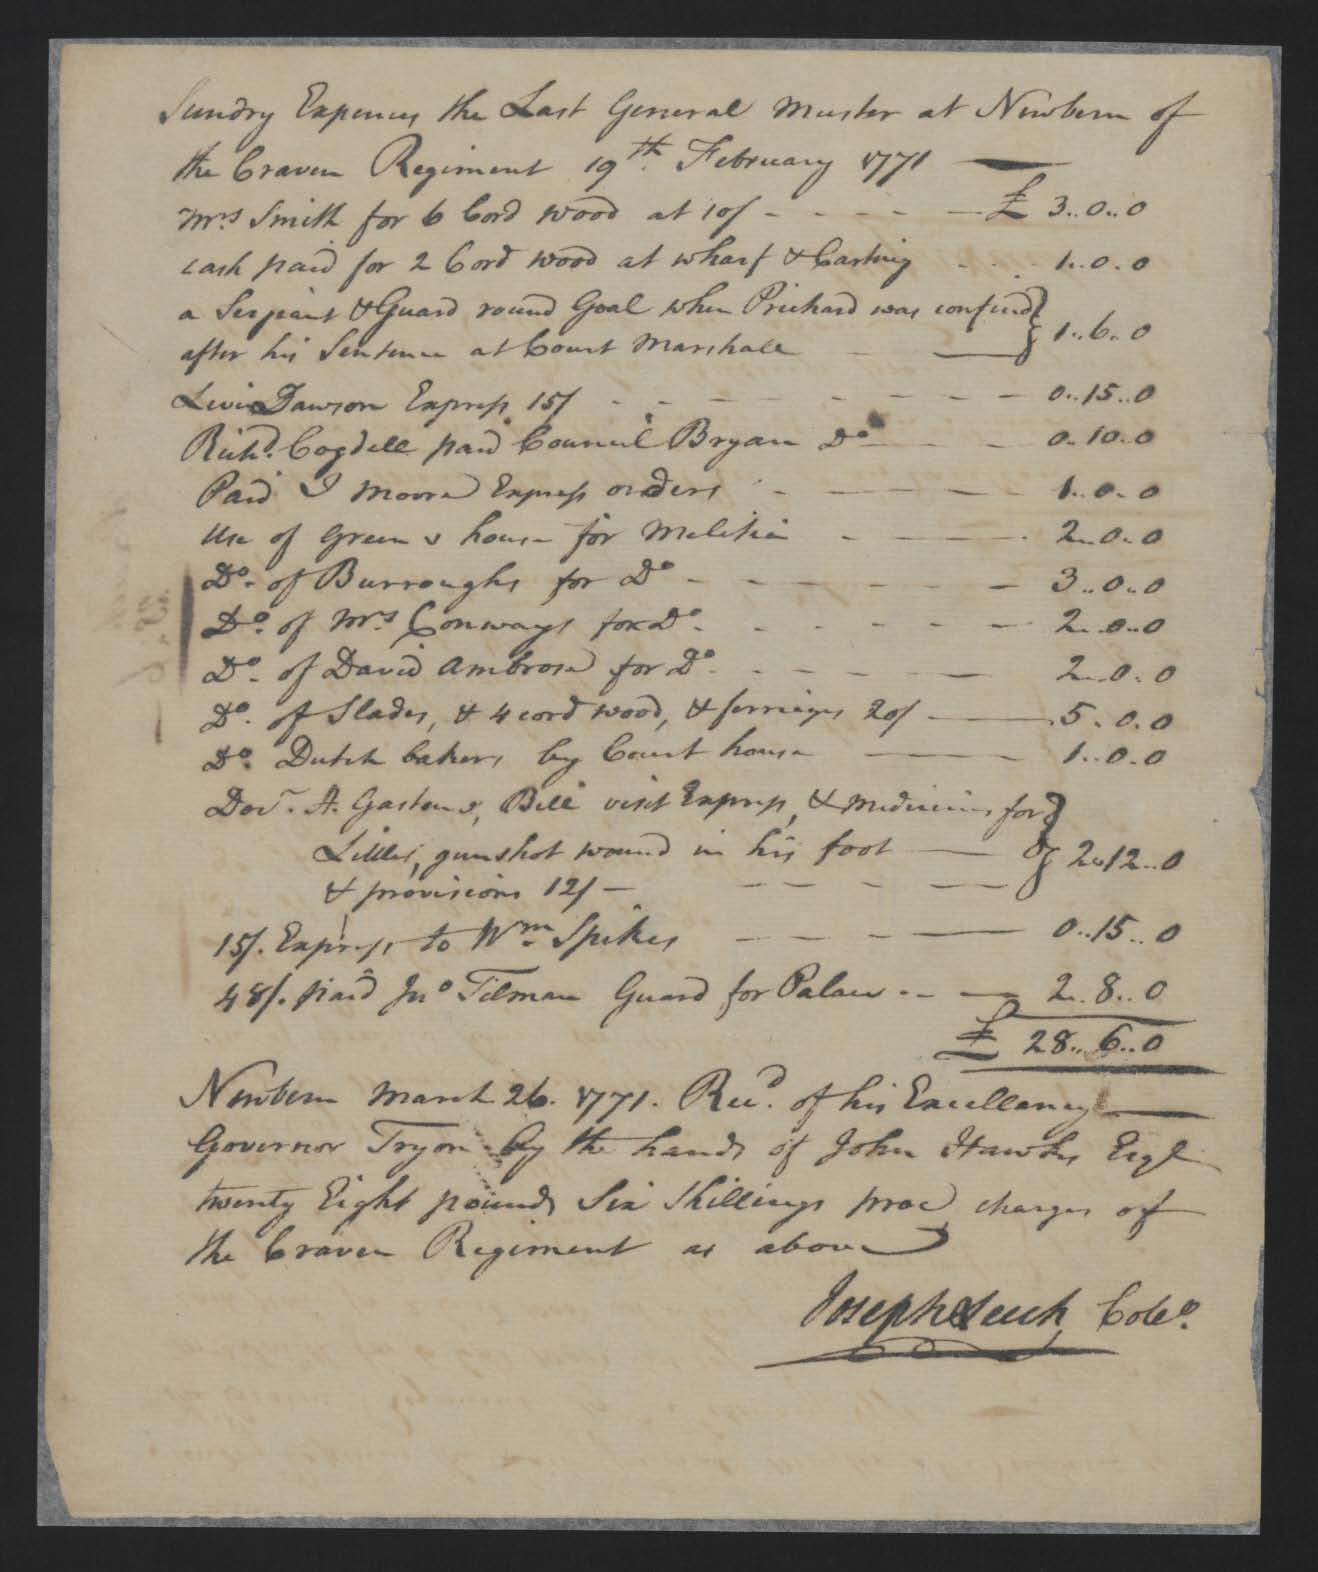 Payments from Joseph Leech on Behalf of the Craven Regiment, 19 February 1771, page 1.